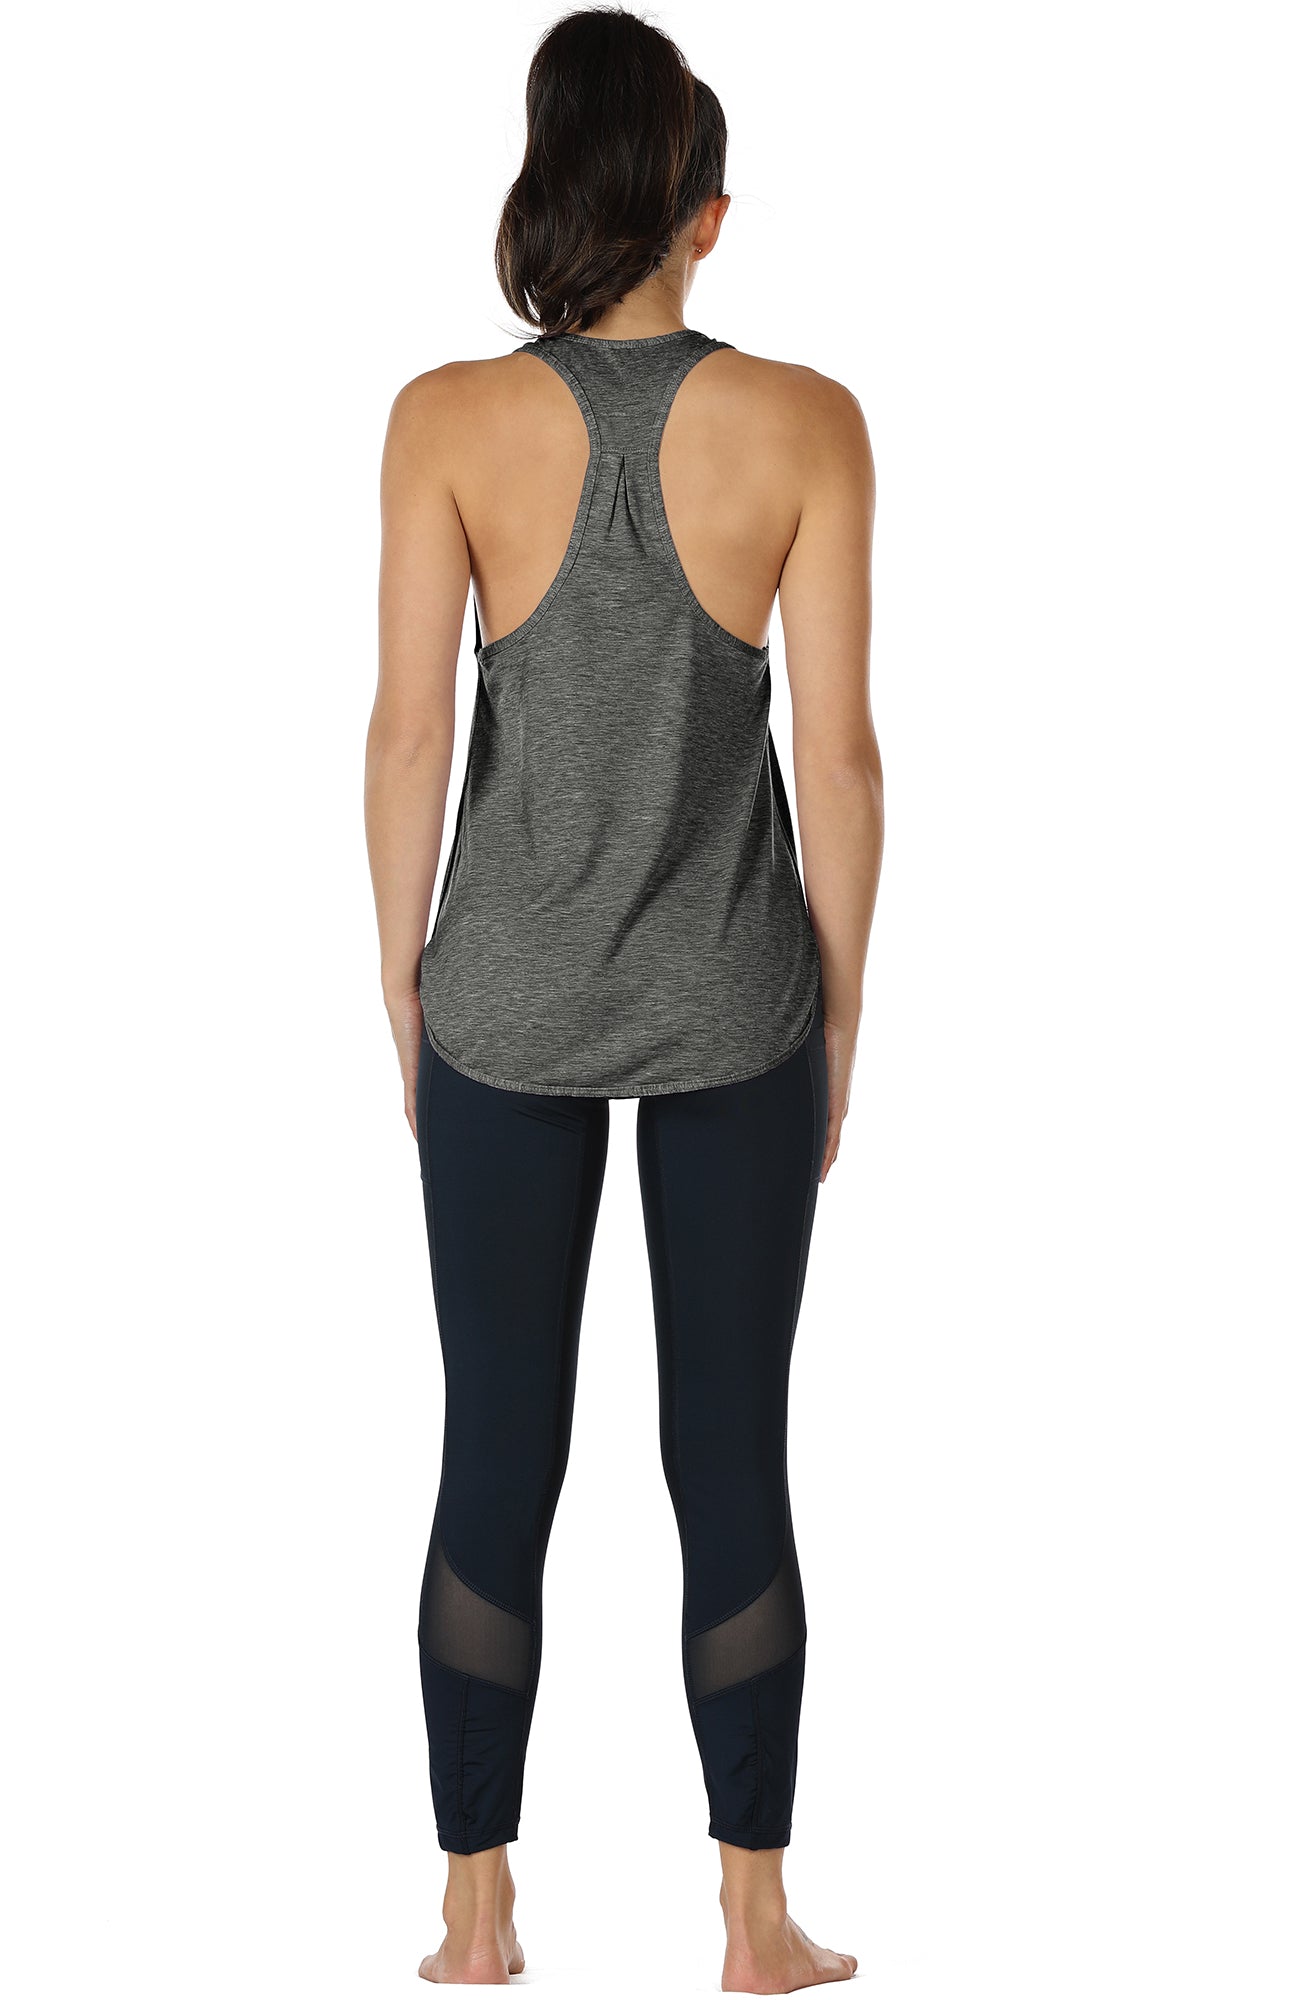 NWT $54 Onzie Flow Women's Long X Back Tank Top black Small S activewear  workout